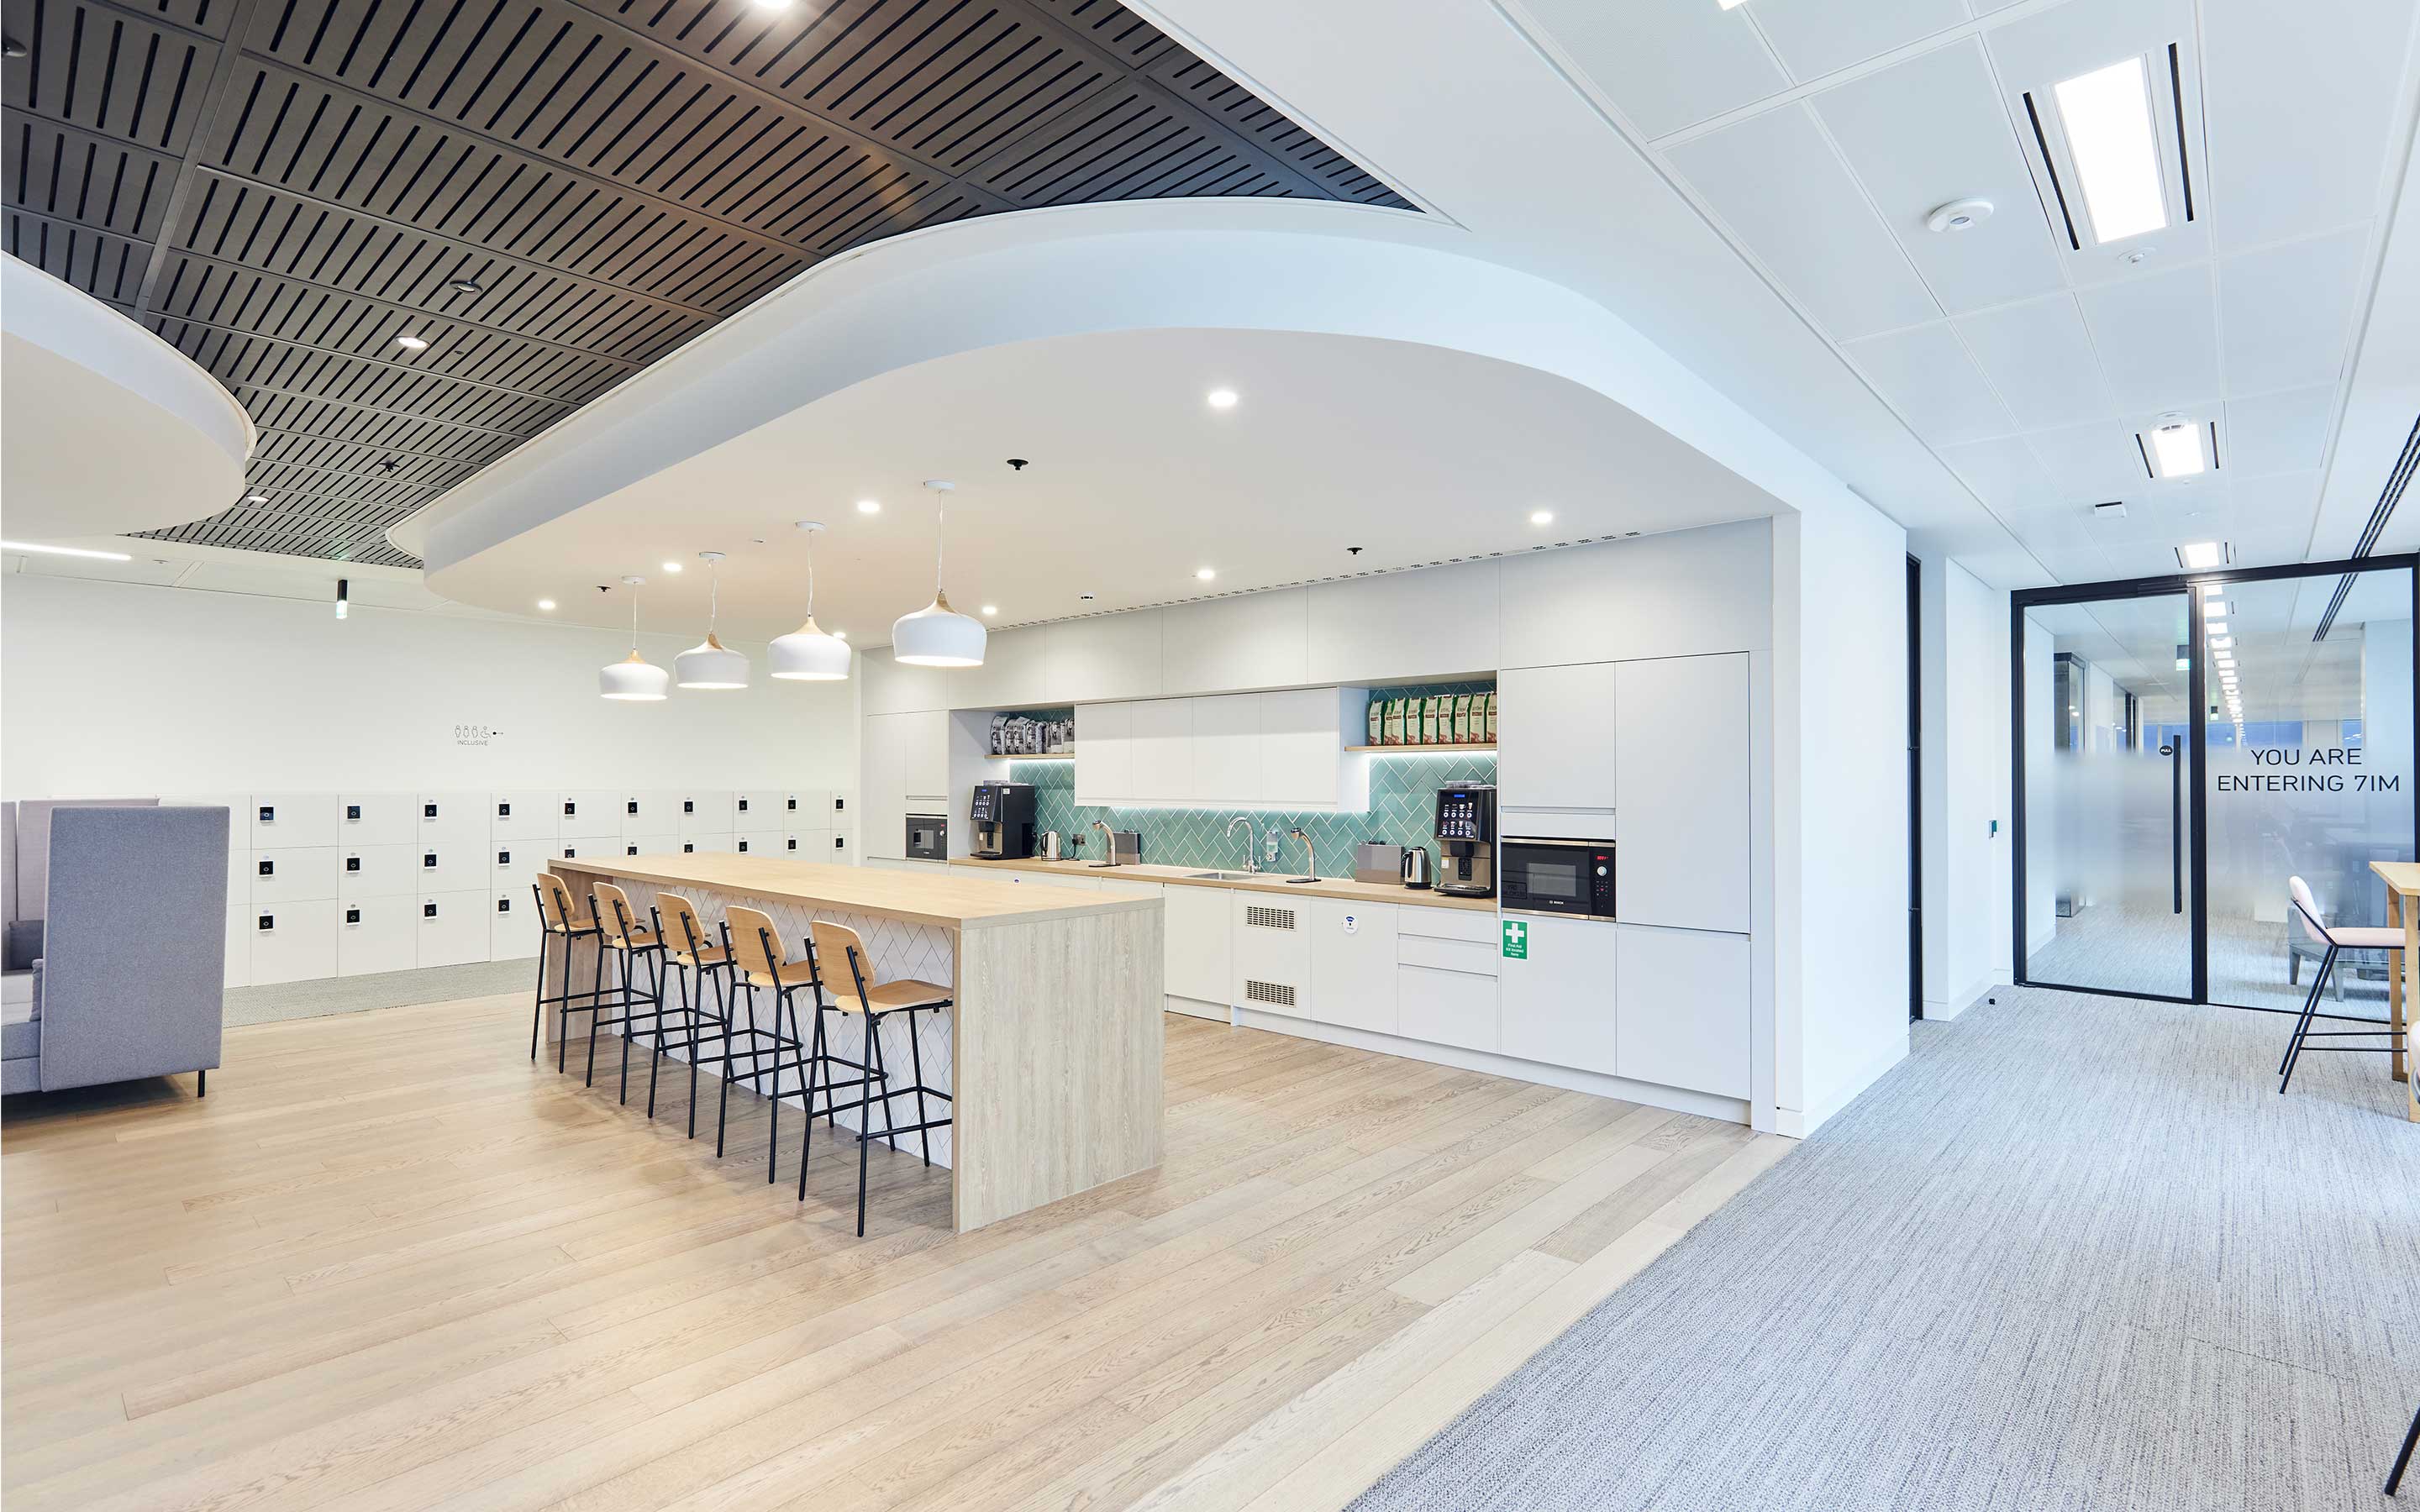 The image shows a bright office kitchen with pale wooden floors, white cabinets, and storage cabinets